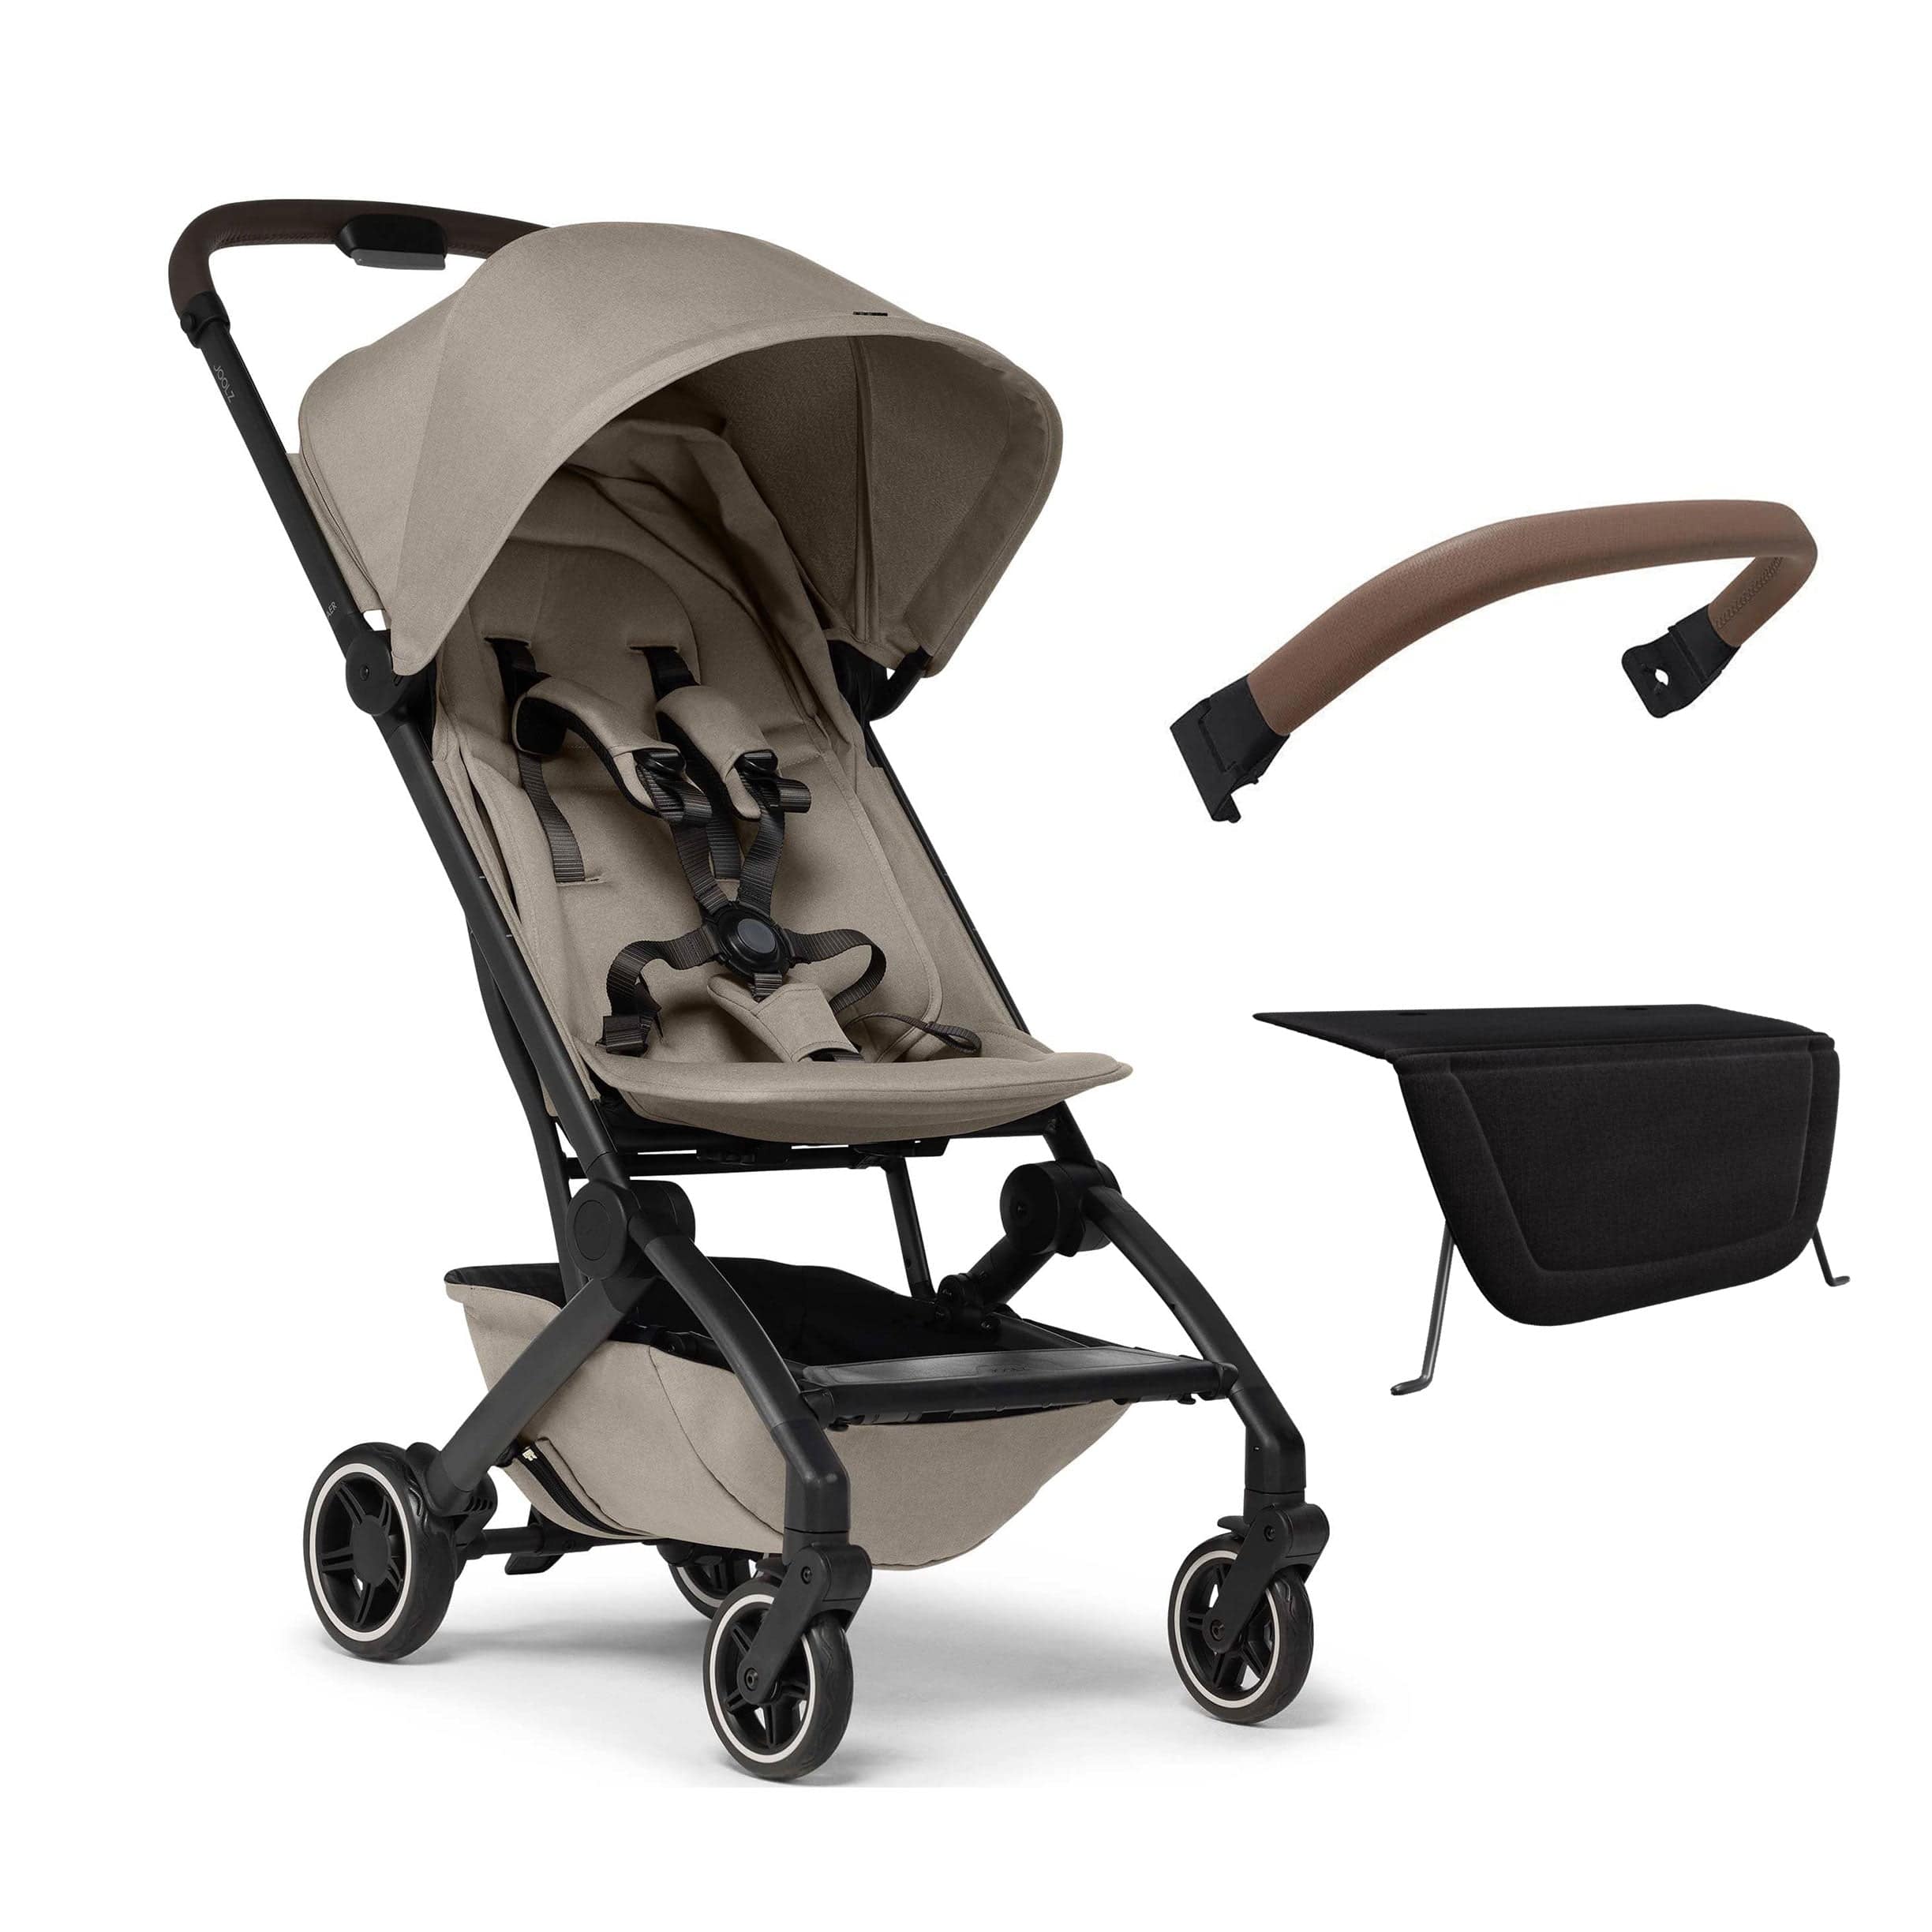 Joolz Aer+ Comfort Bundle in Sandy Taupe Pushchairs & Buggies 15450-SDT 8715688085004